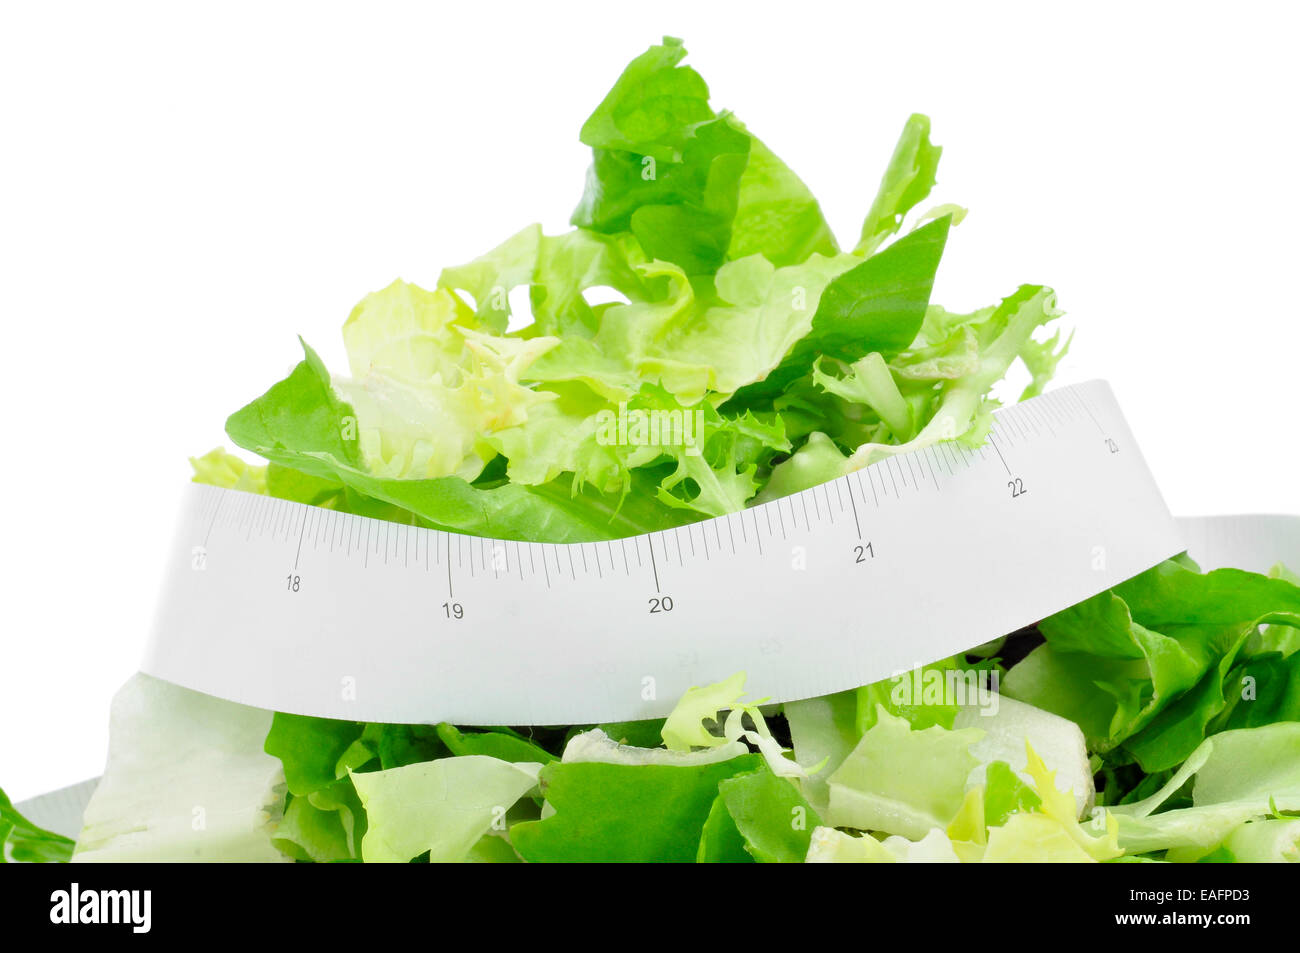 closeup of a plate with a green salad and a measuring tape, symbolizing the dieting concept or to stay fit Stock Photo